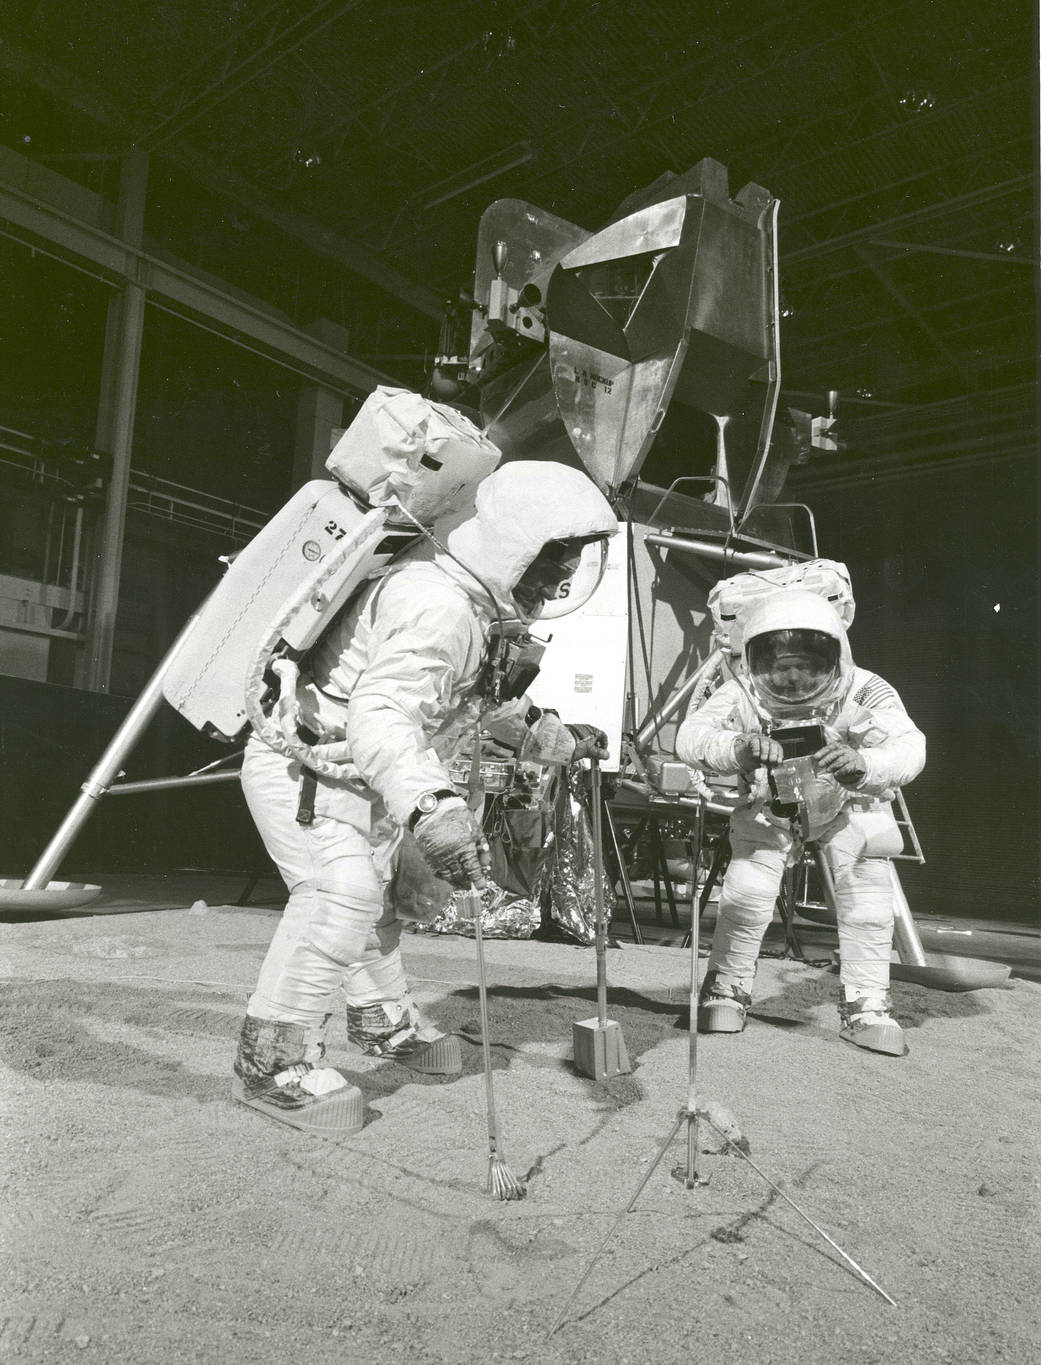 Two members of the Apollo 11 lunar landing mission participate in a simulation of deploying and using lunar tools on the surface of the Moon during a training exercise on April 22, 1969. Astronaut Buzz (Aldrin Jr. on left), lunar module pilot, uses a scoop and tongs to pick up a soil sample. Astronaut Neil A. Armstrong, Apollo 11 commander, holds a bag to receive the sample. In the background is a Lunar Module mockup.